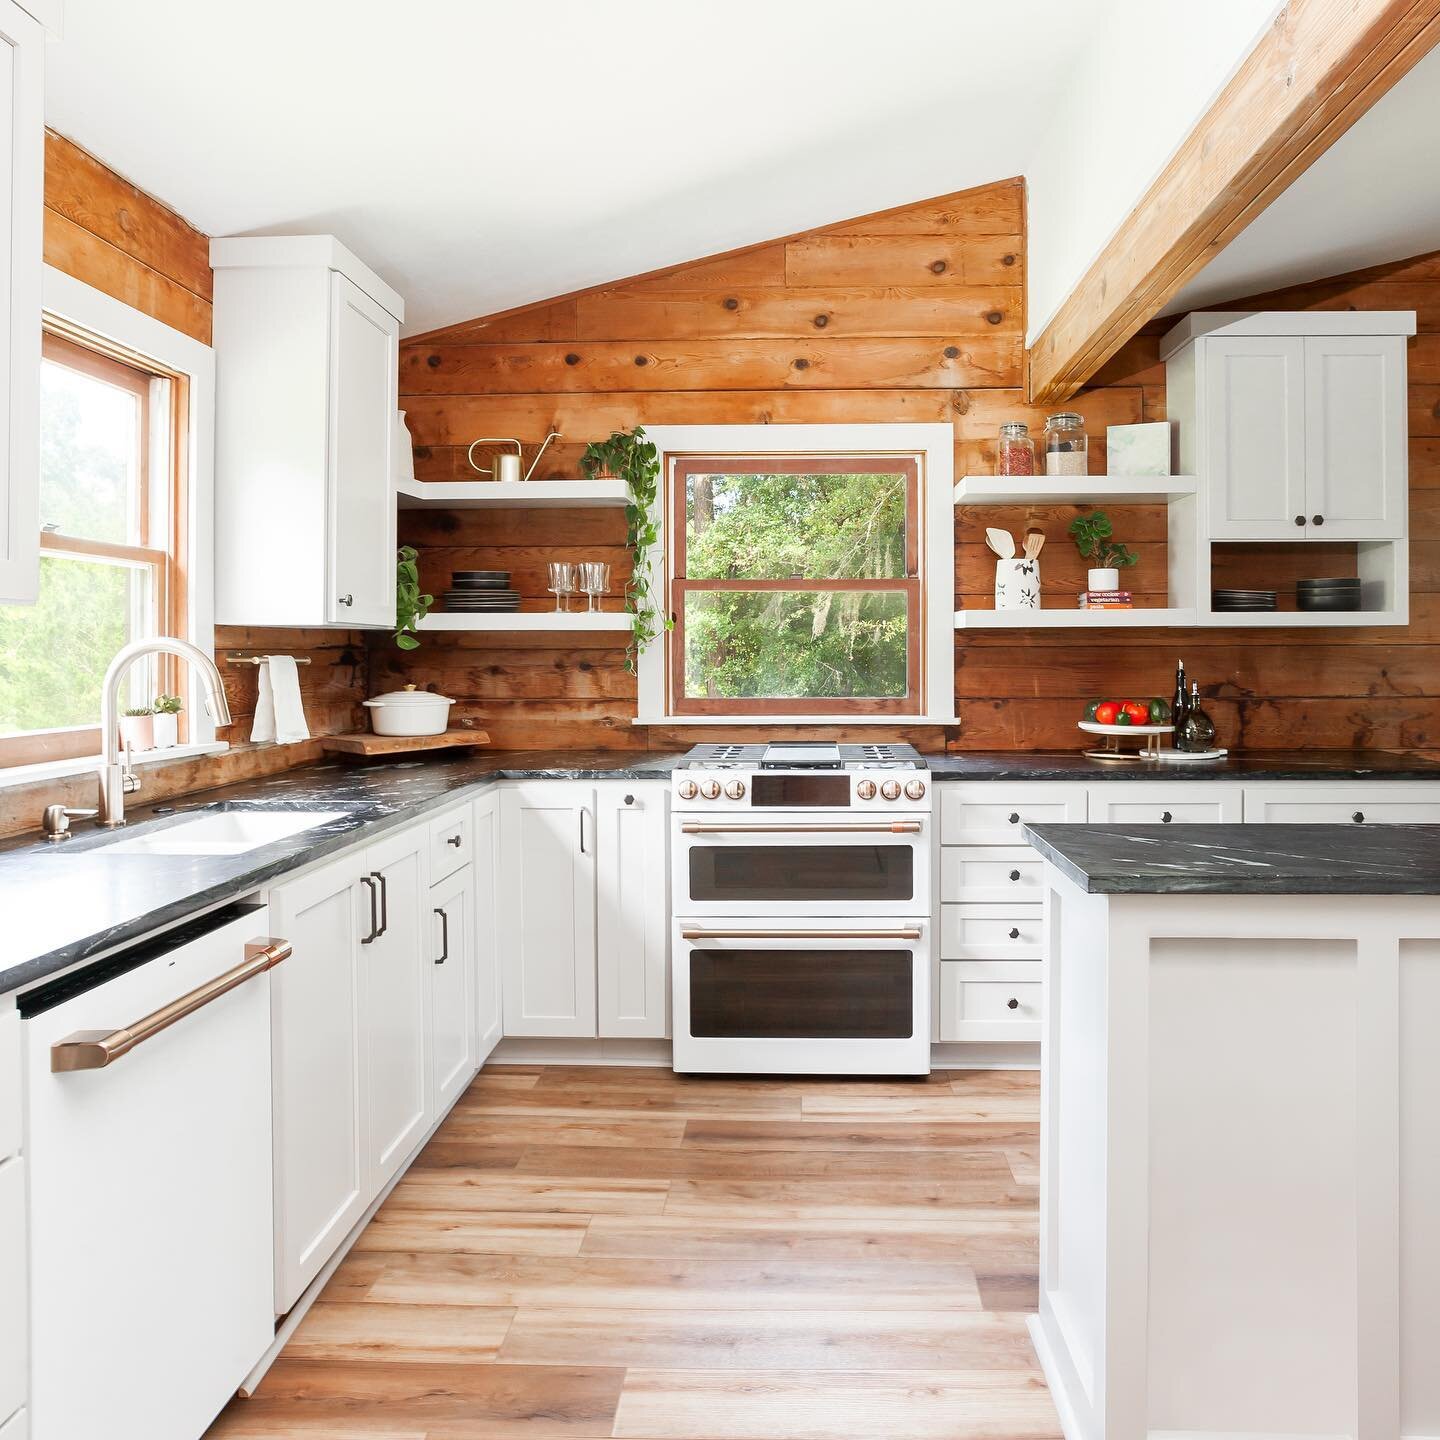 Happy Friday! This stunning kitchen renovation in this log cabin is the perfect example of how to combine modern style with rustic charm. The soft greige cabinets and soapstone countertop give this kitchen a clean and contemporary look, while the ori